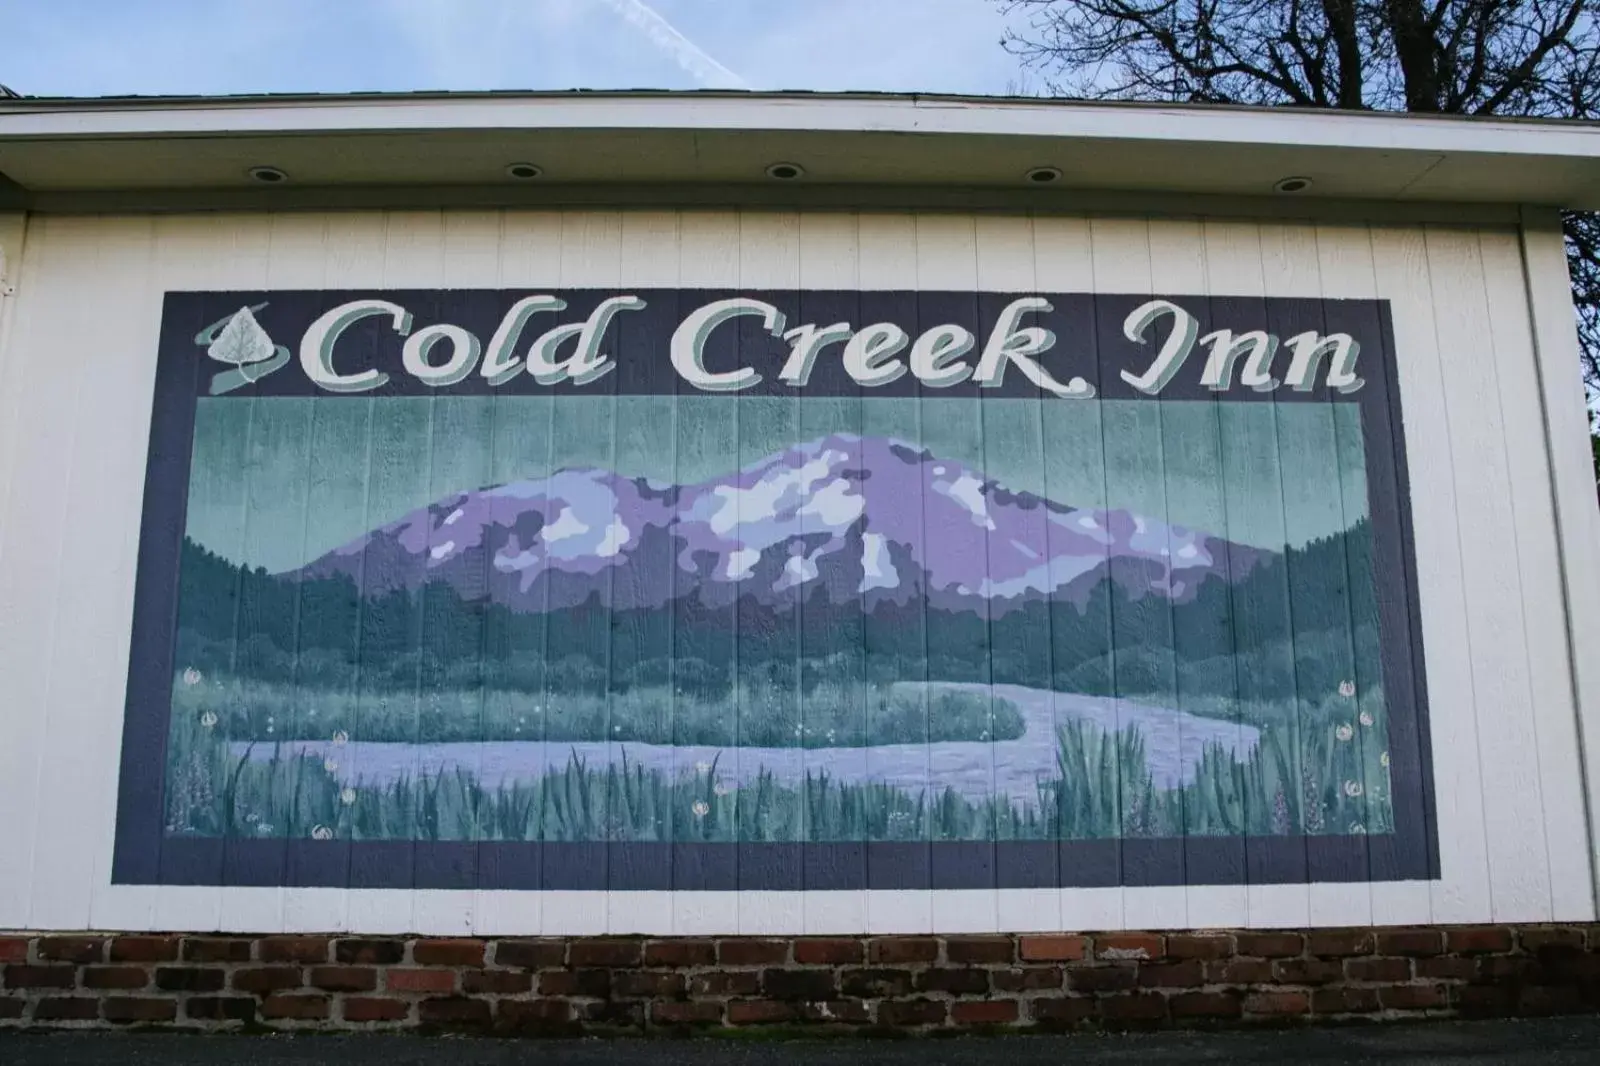 Property logo or sign in Cold Creek Inn